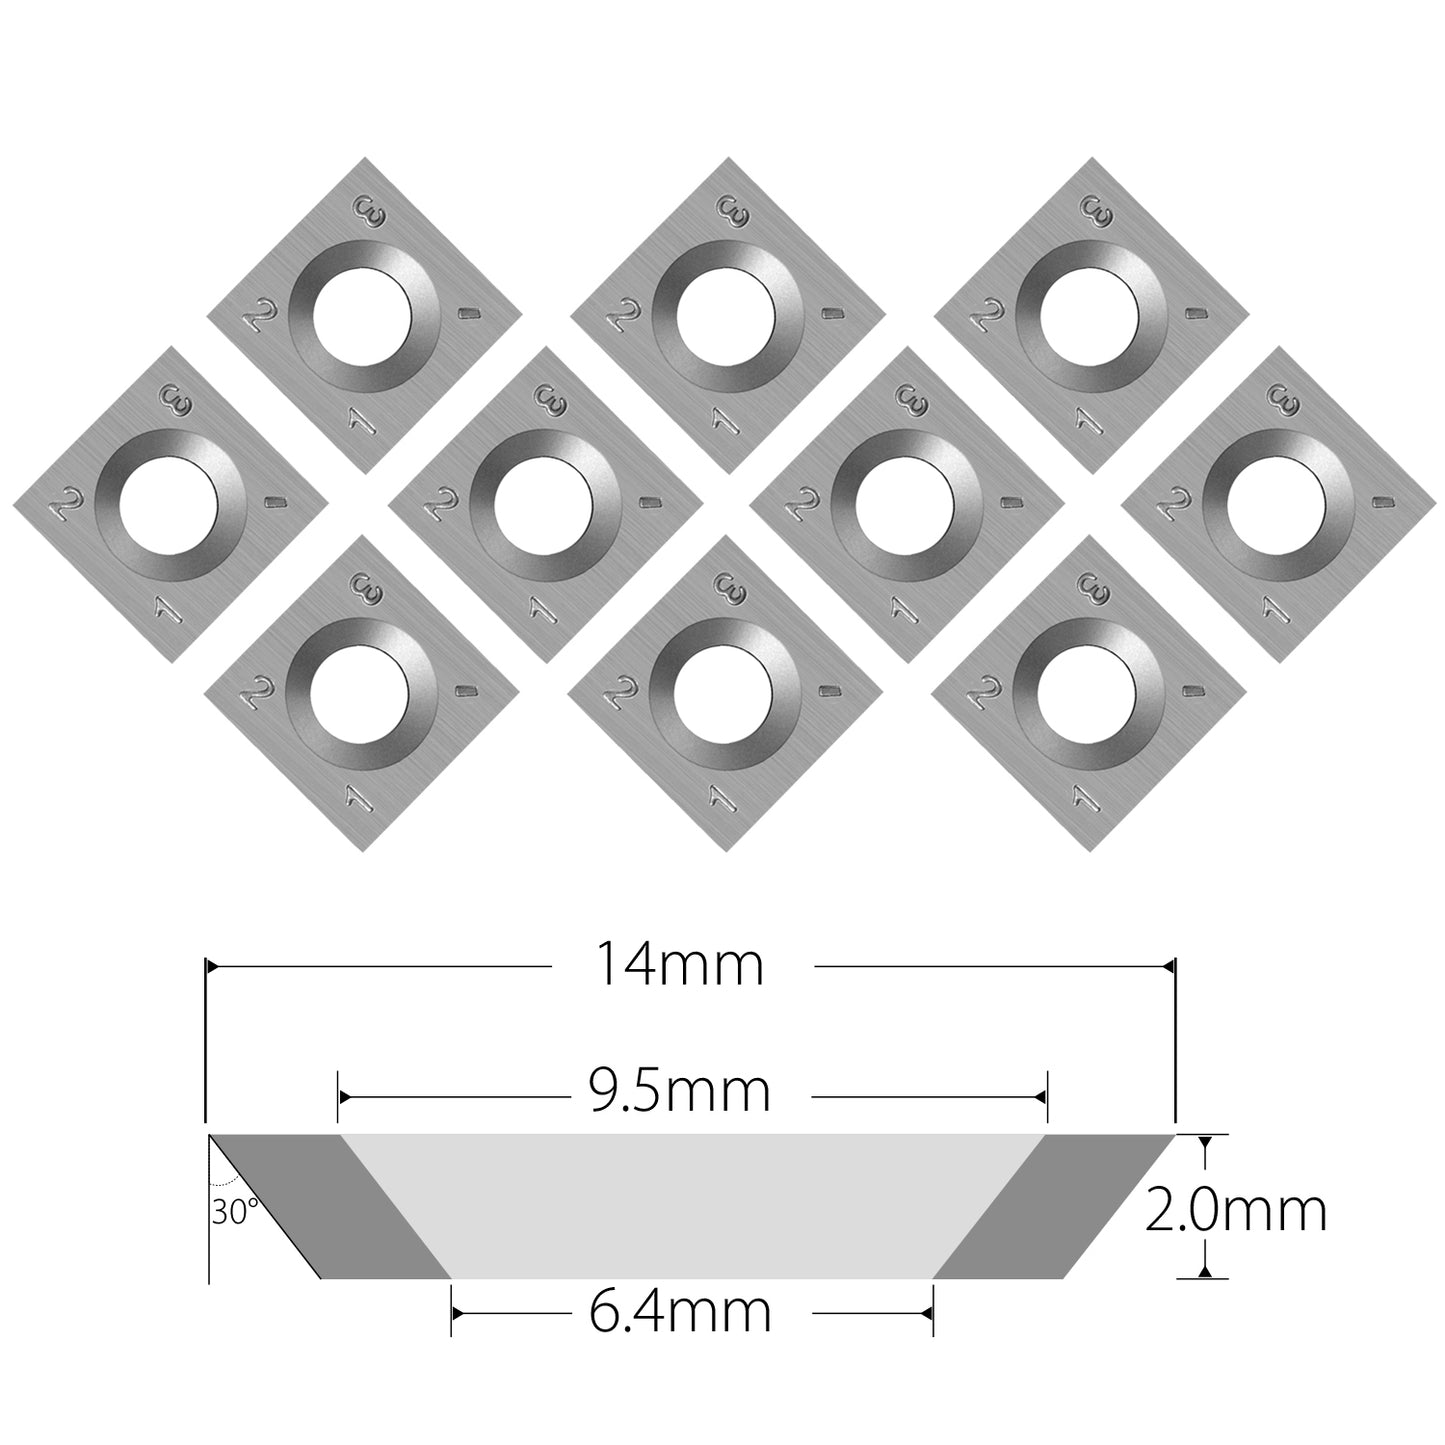 Indexable Tungsten Carbide Inserts Cutters 14x14x2mm-30°,4-Edge for EWT Rougher Wood Turning Tools or Handheld Scraper